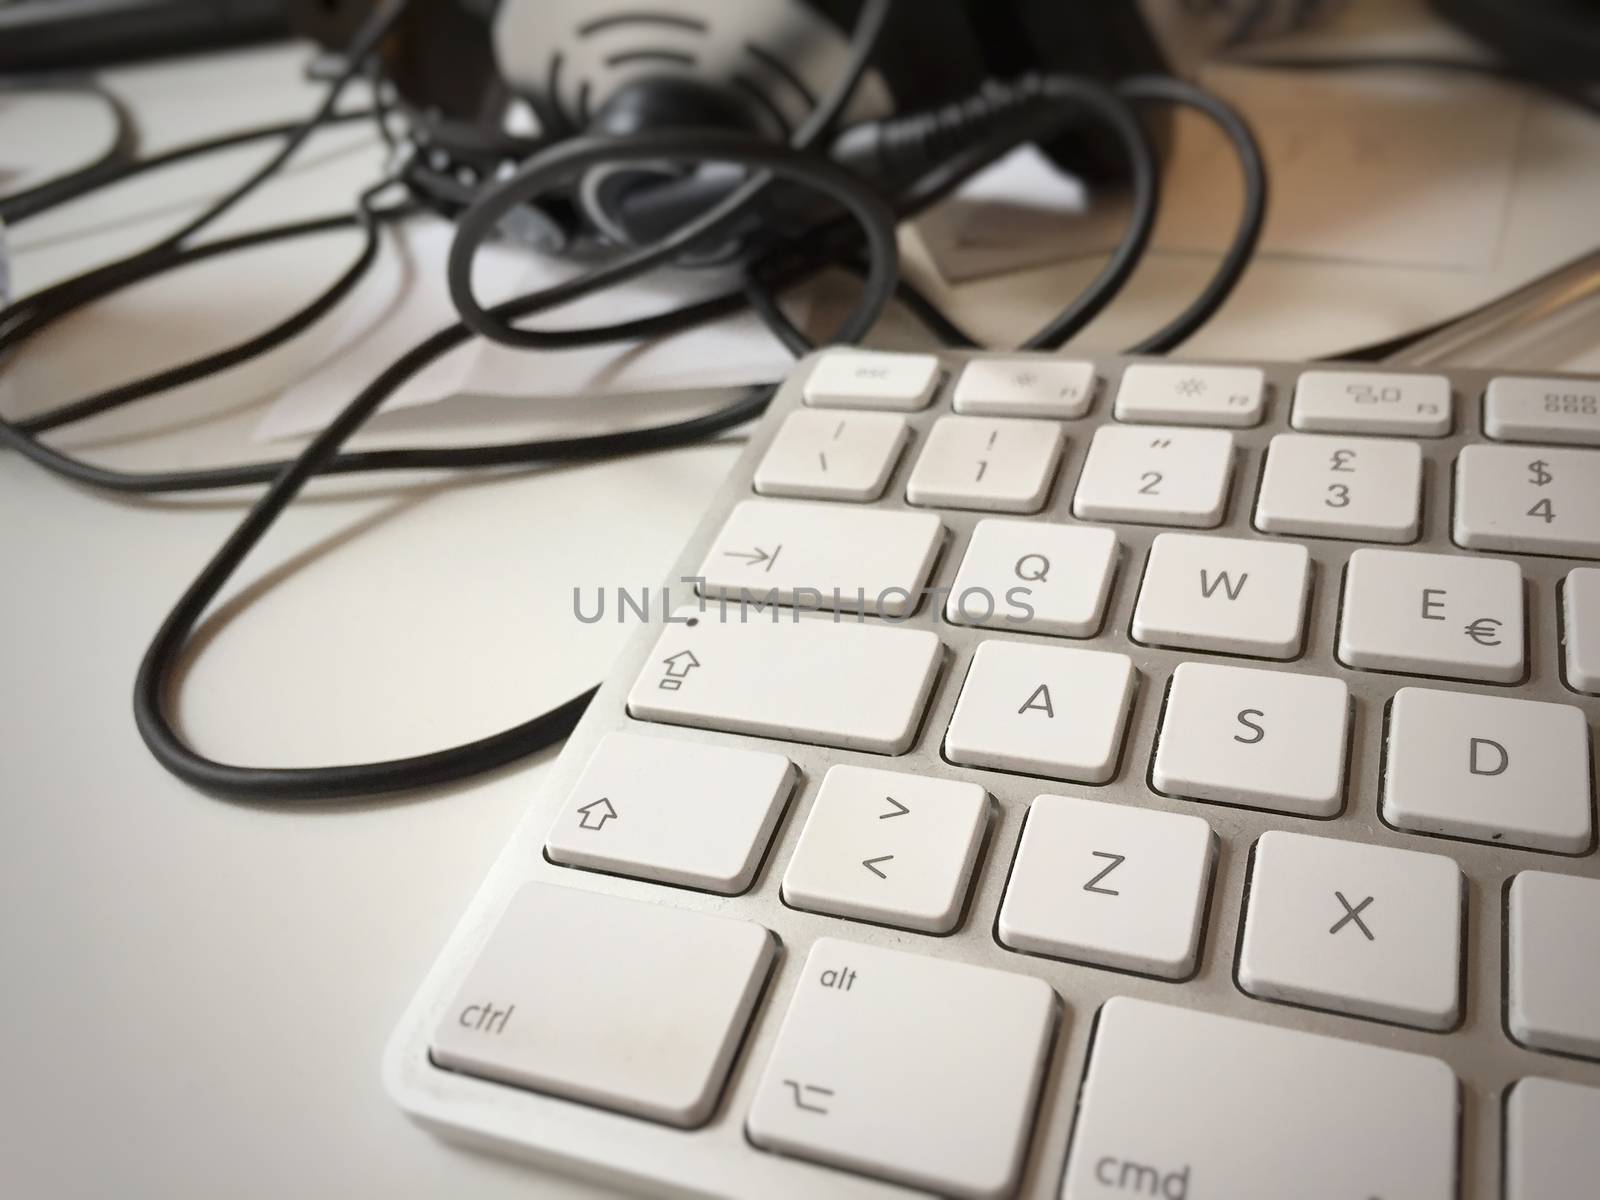 close-up view of a modern white PC keyboard with headphones on the blurred background